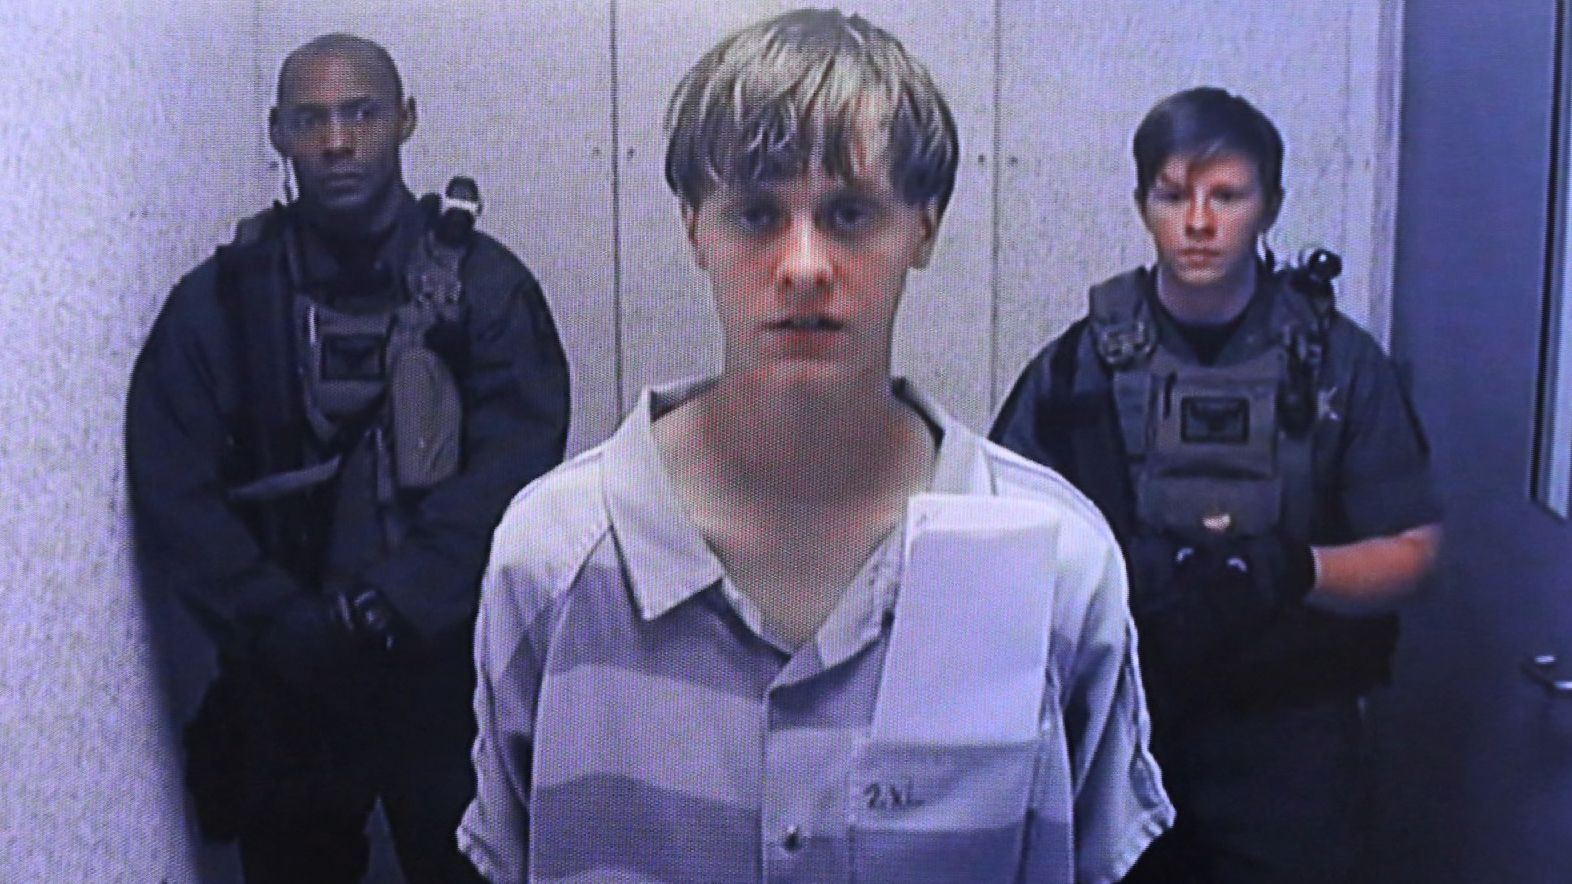 Dylann Roof could be sentenced to death for killing nine African-American parishioners in a Charleston church.